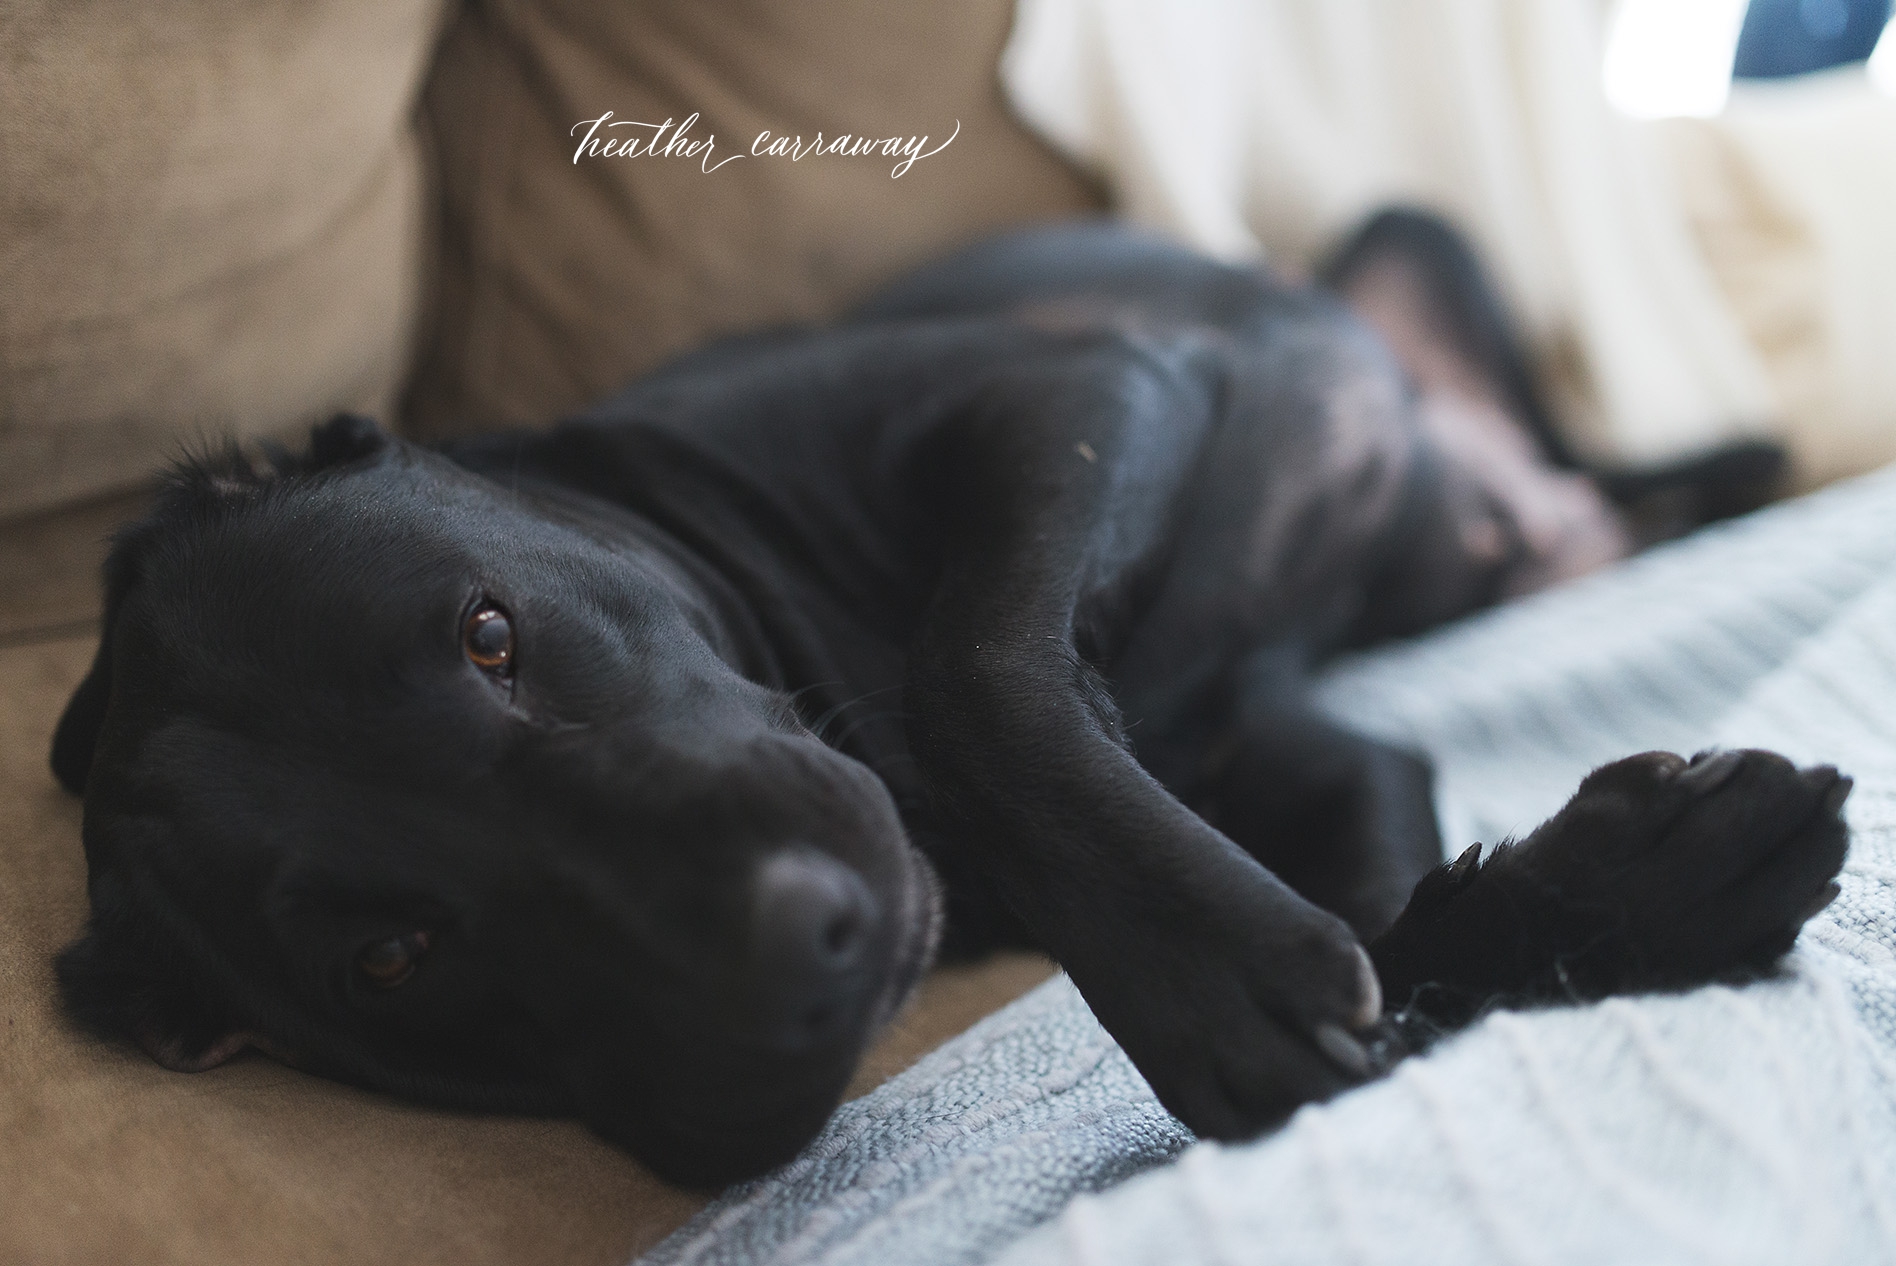 atlanta baby photographer, real life images, lifestyle documentary photography, atlanta photographer, black labs, indoor pet